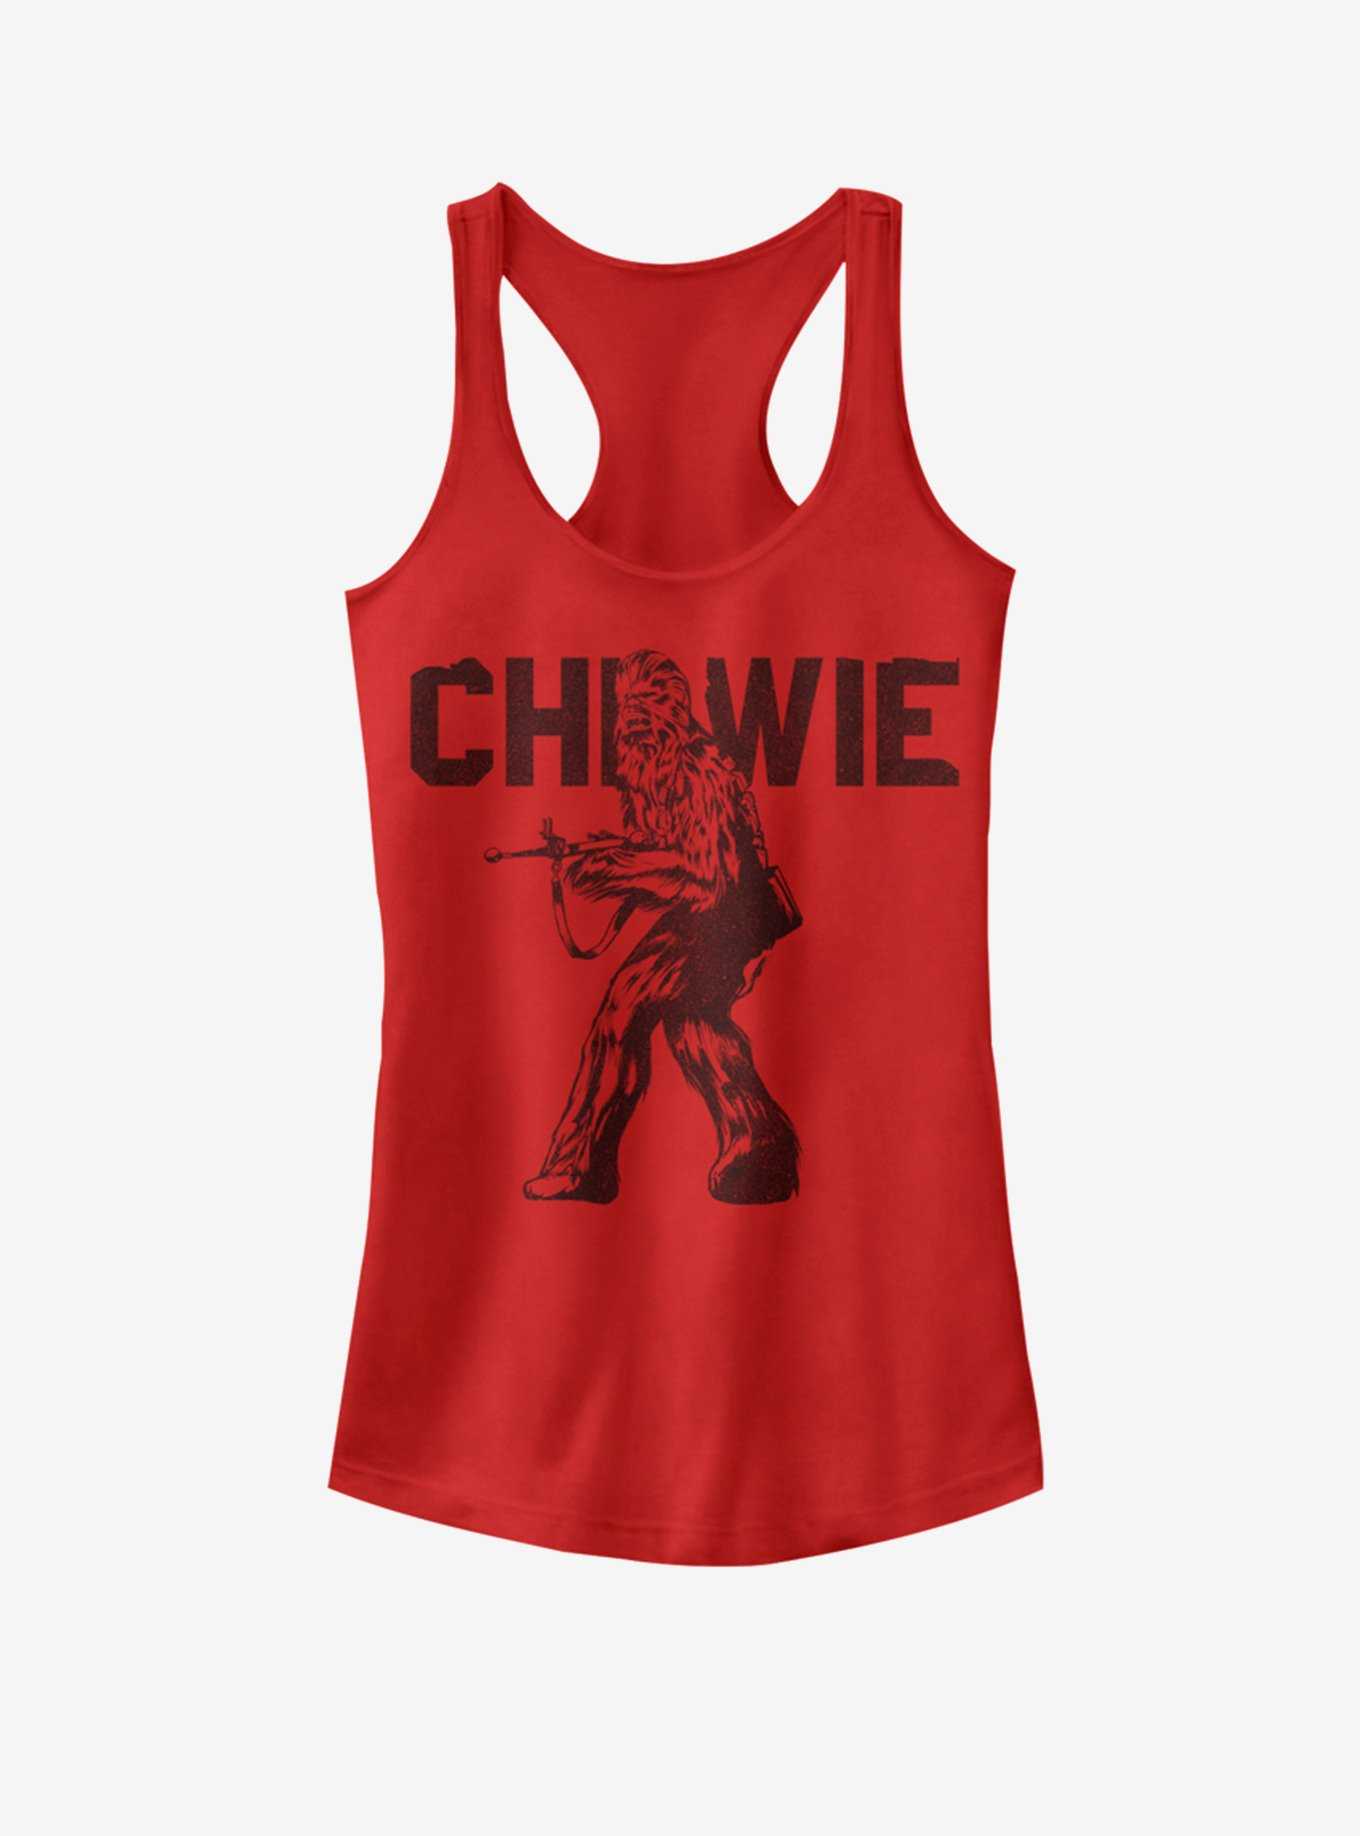 Star Wars Chewy Girls Tank, , hi-res